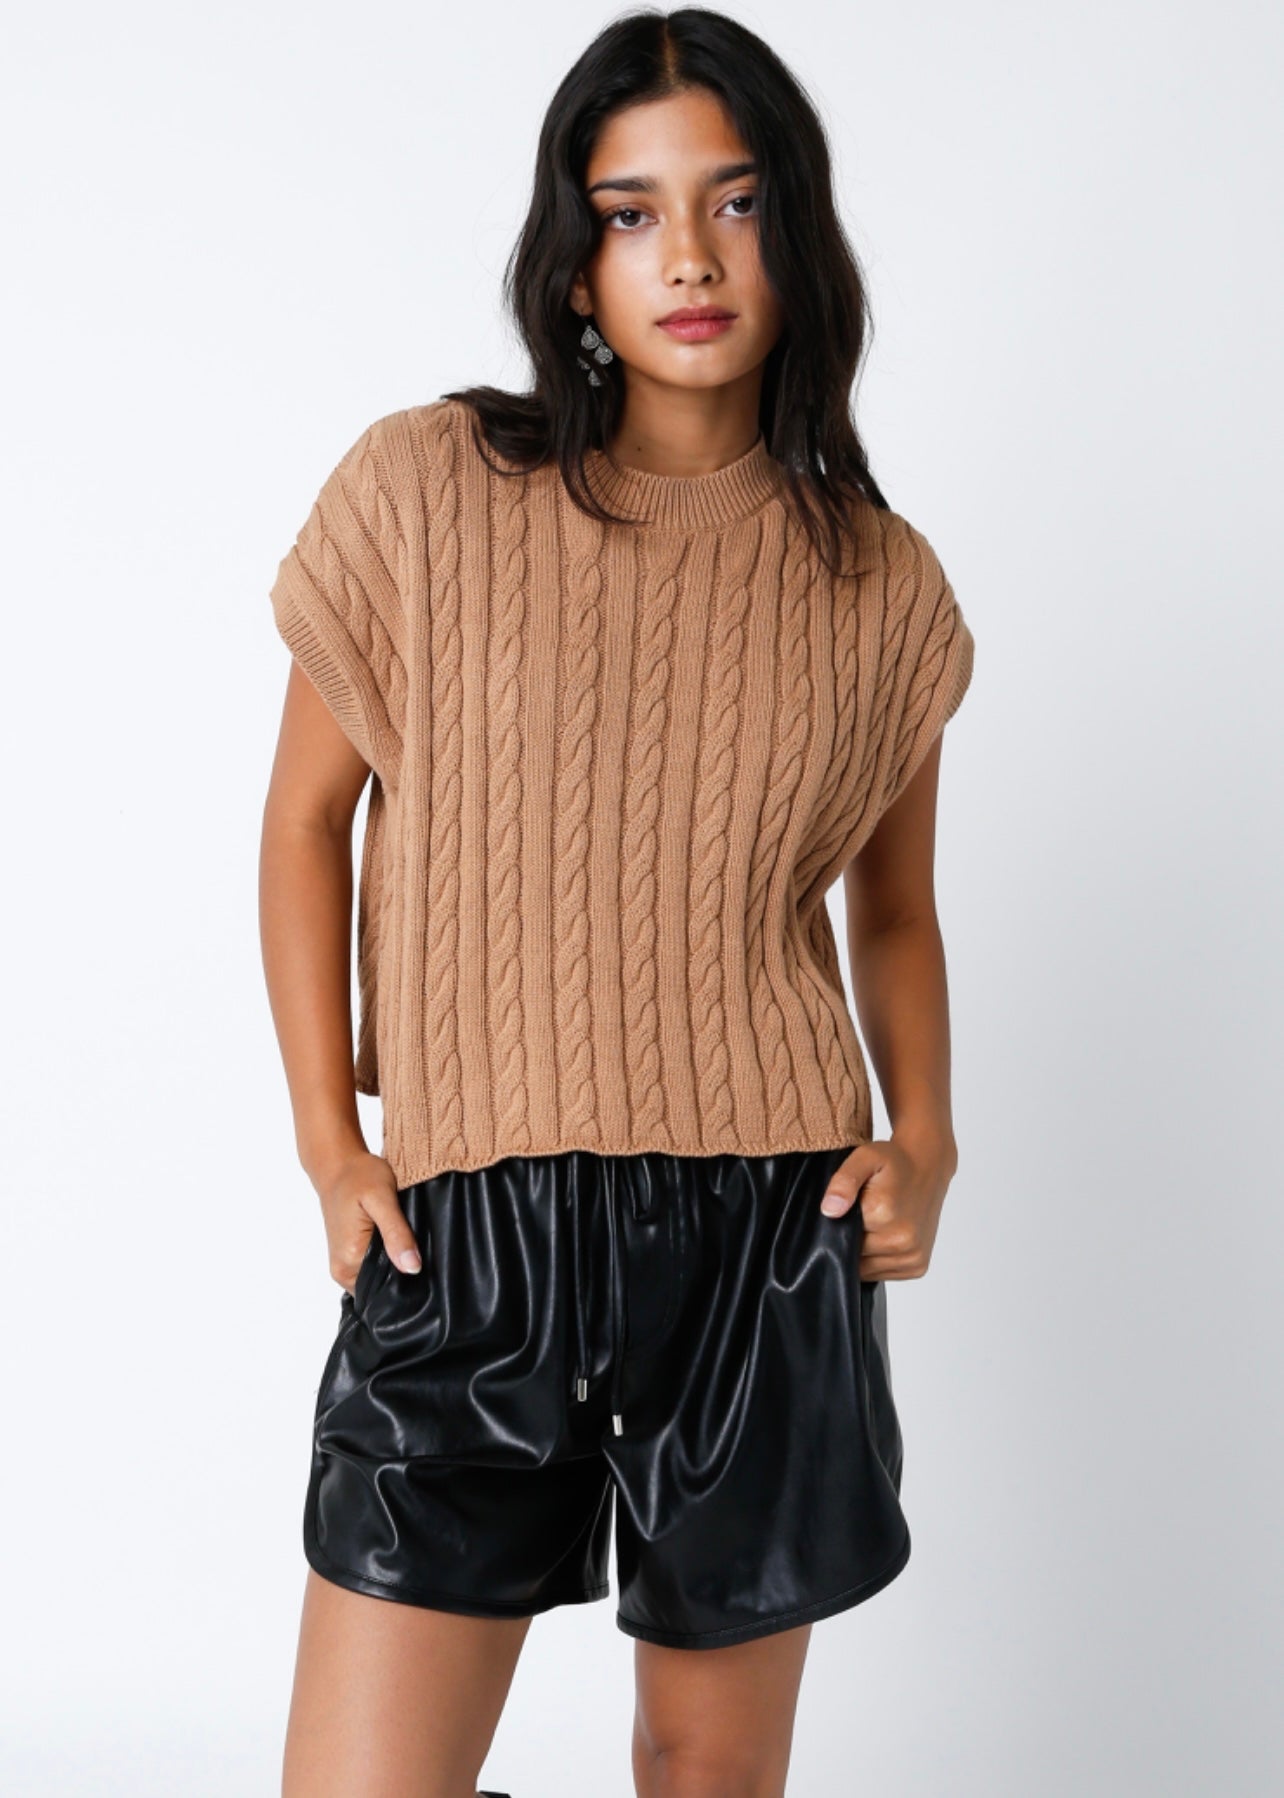 Never Let Me Go Tan Cable Knit Sweater Top